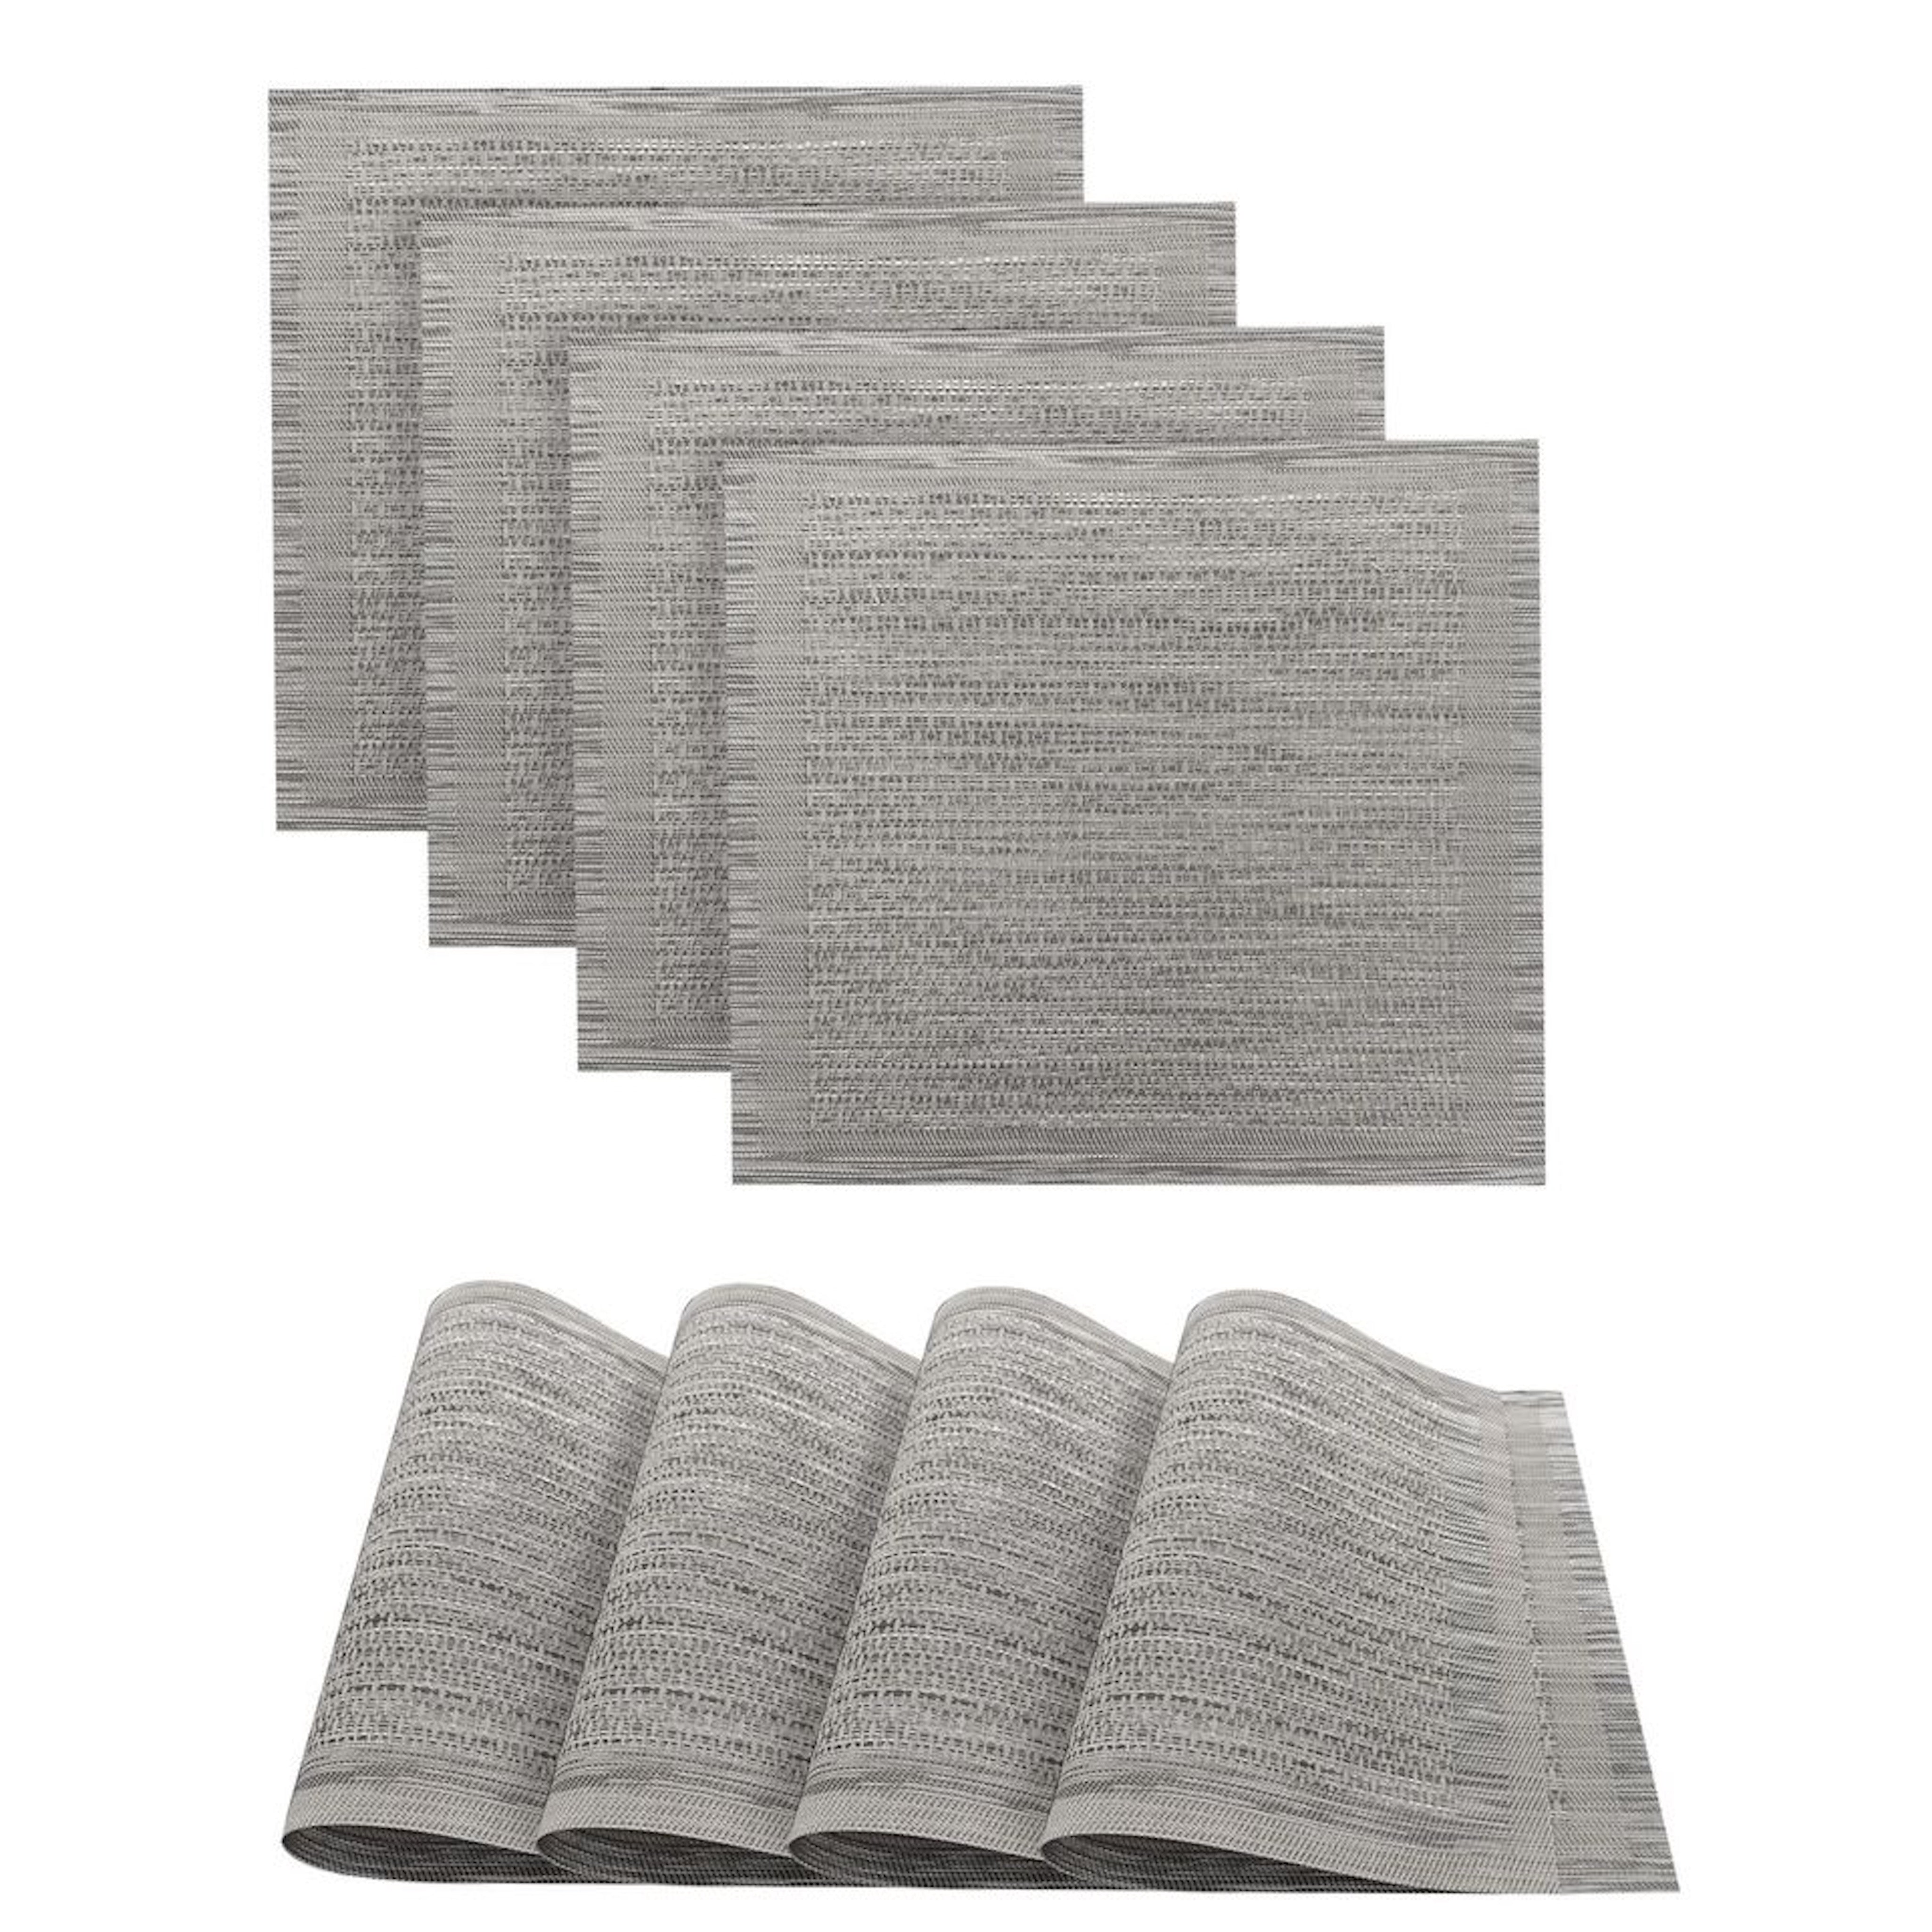 Dainty Home Geneva Woven Textilene Crossweave With Textured Geometric Stripe Pattern Reversible 15" x 15" Square Placemats